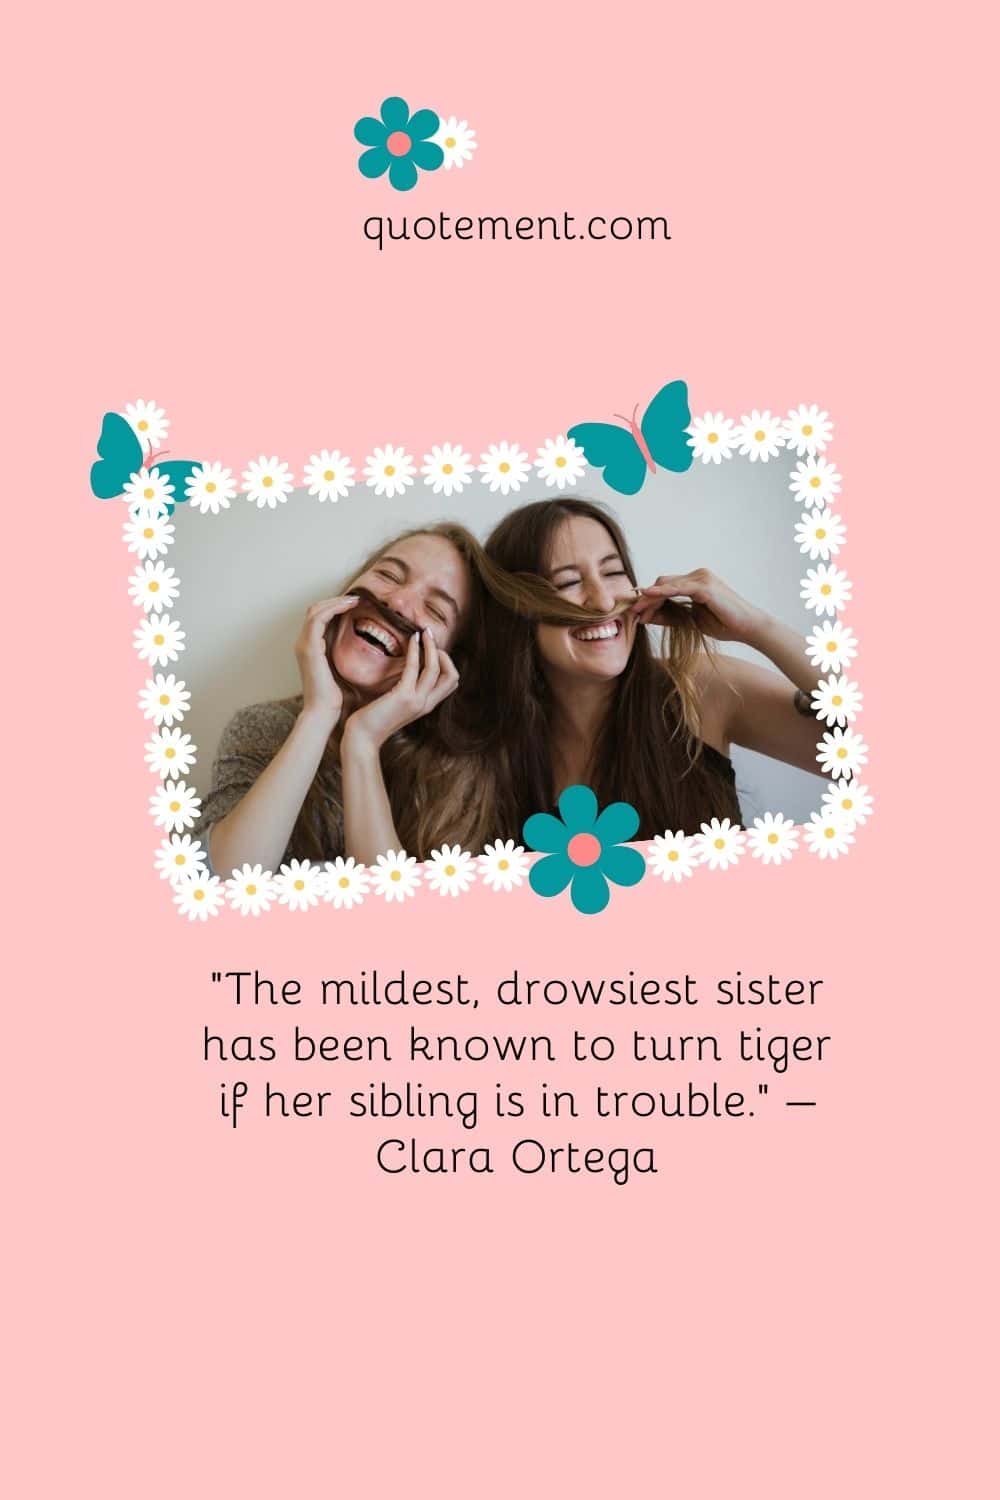 “The mildest, drowsiest sister has been known to turn tiger if her sibling is in trouble.” – Clara Ortega